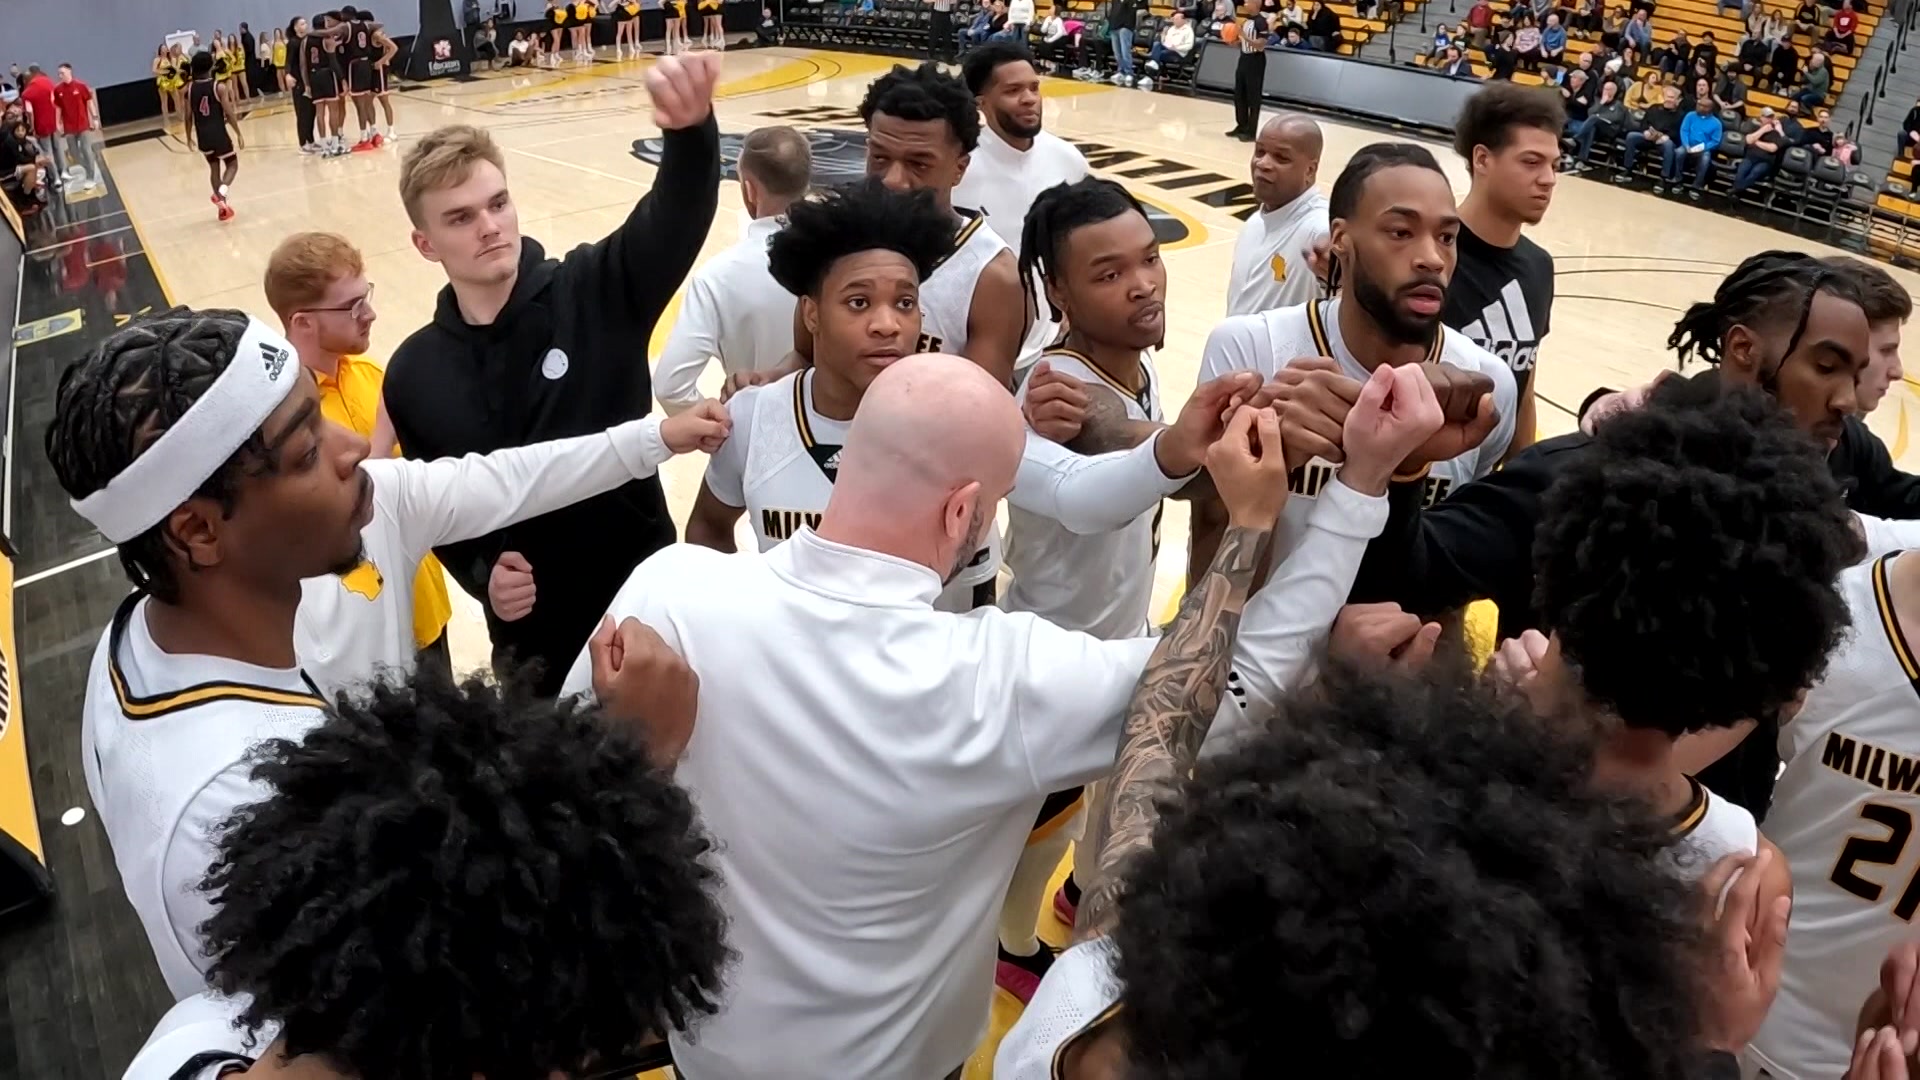 Behind the Scenes: Milwaukee Panthers men's basketball